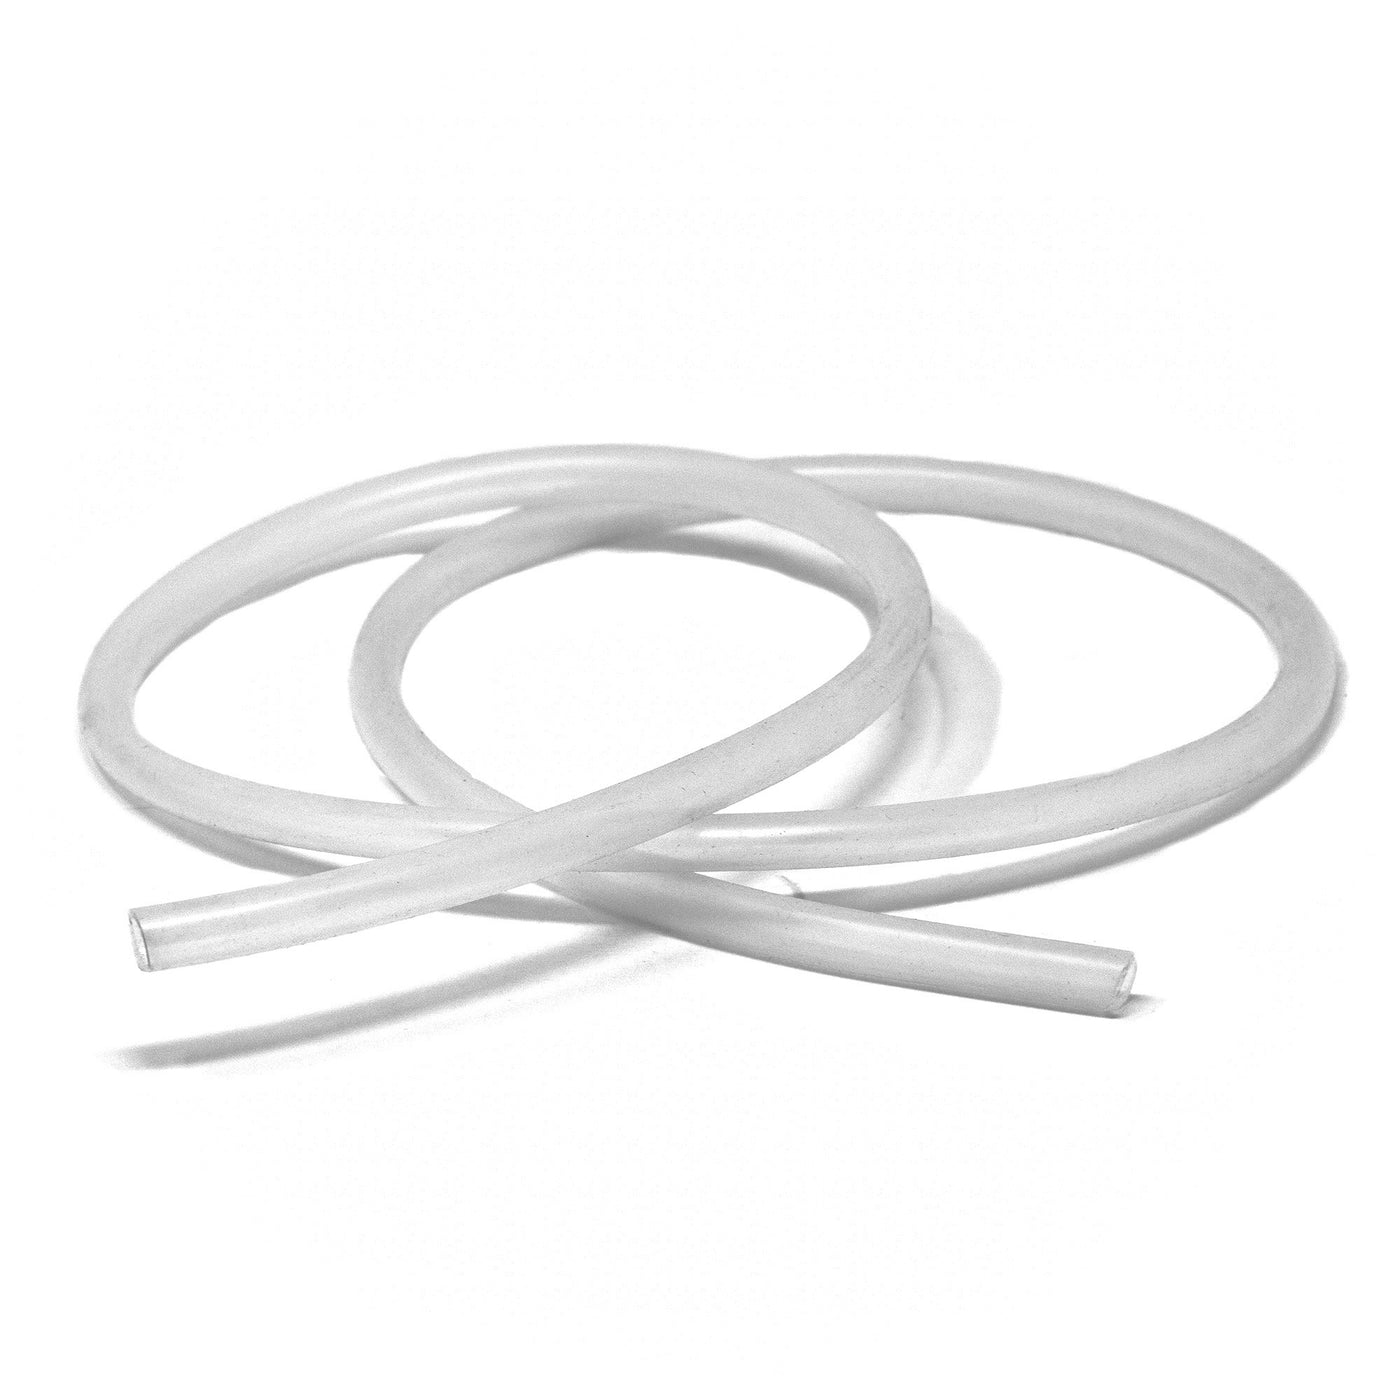 Rocket 9x12 Silicone Tubing - PRT353F6720 - uncoiled